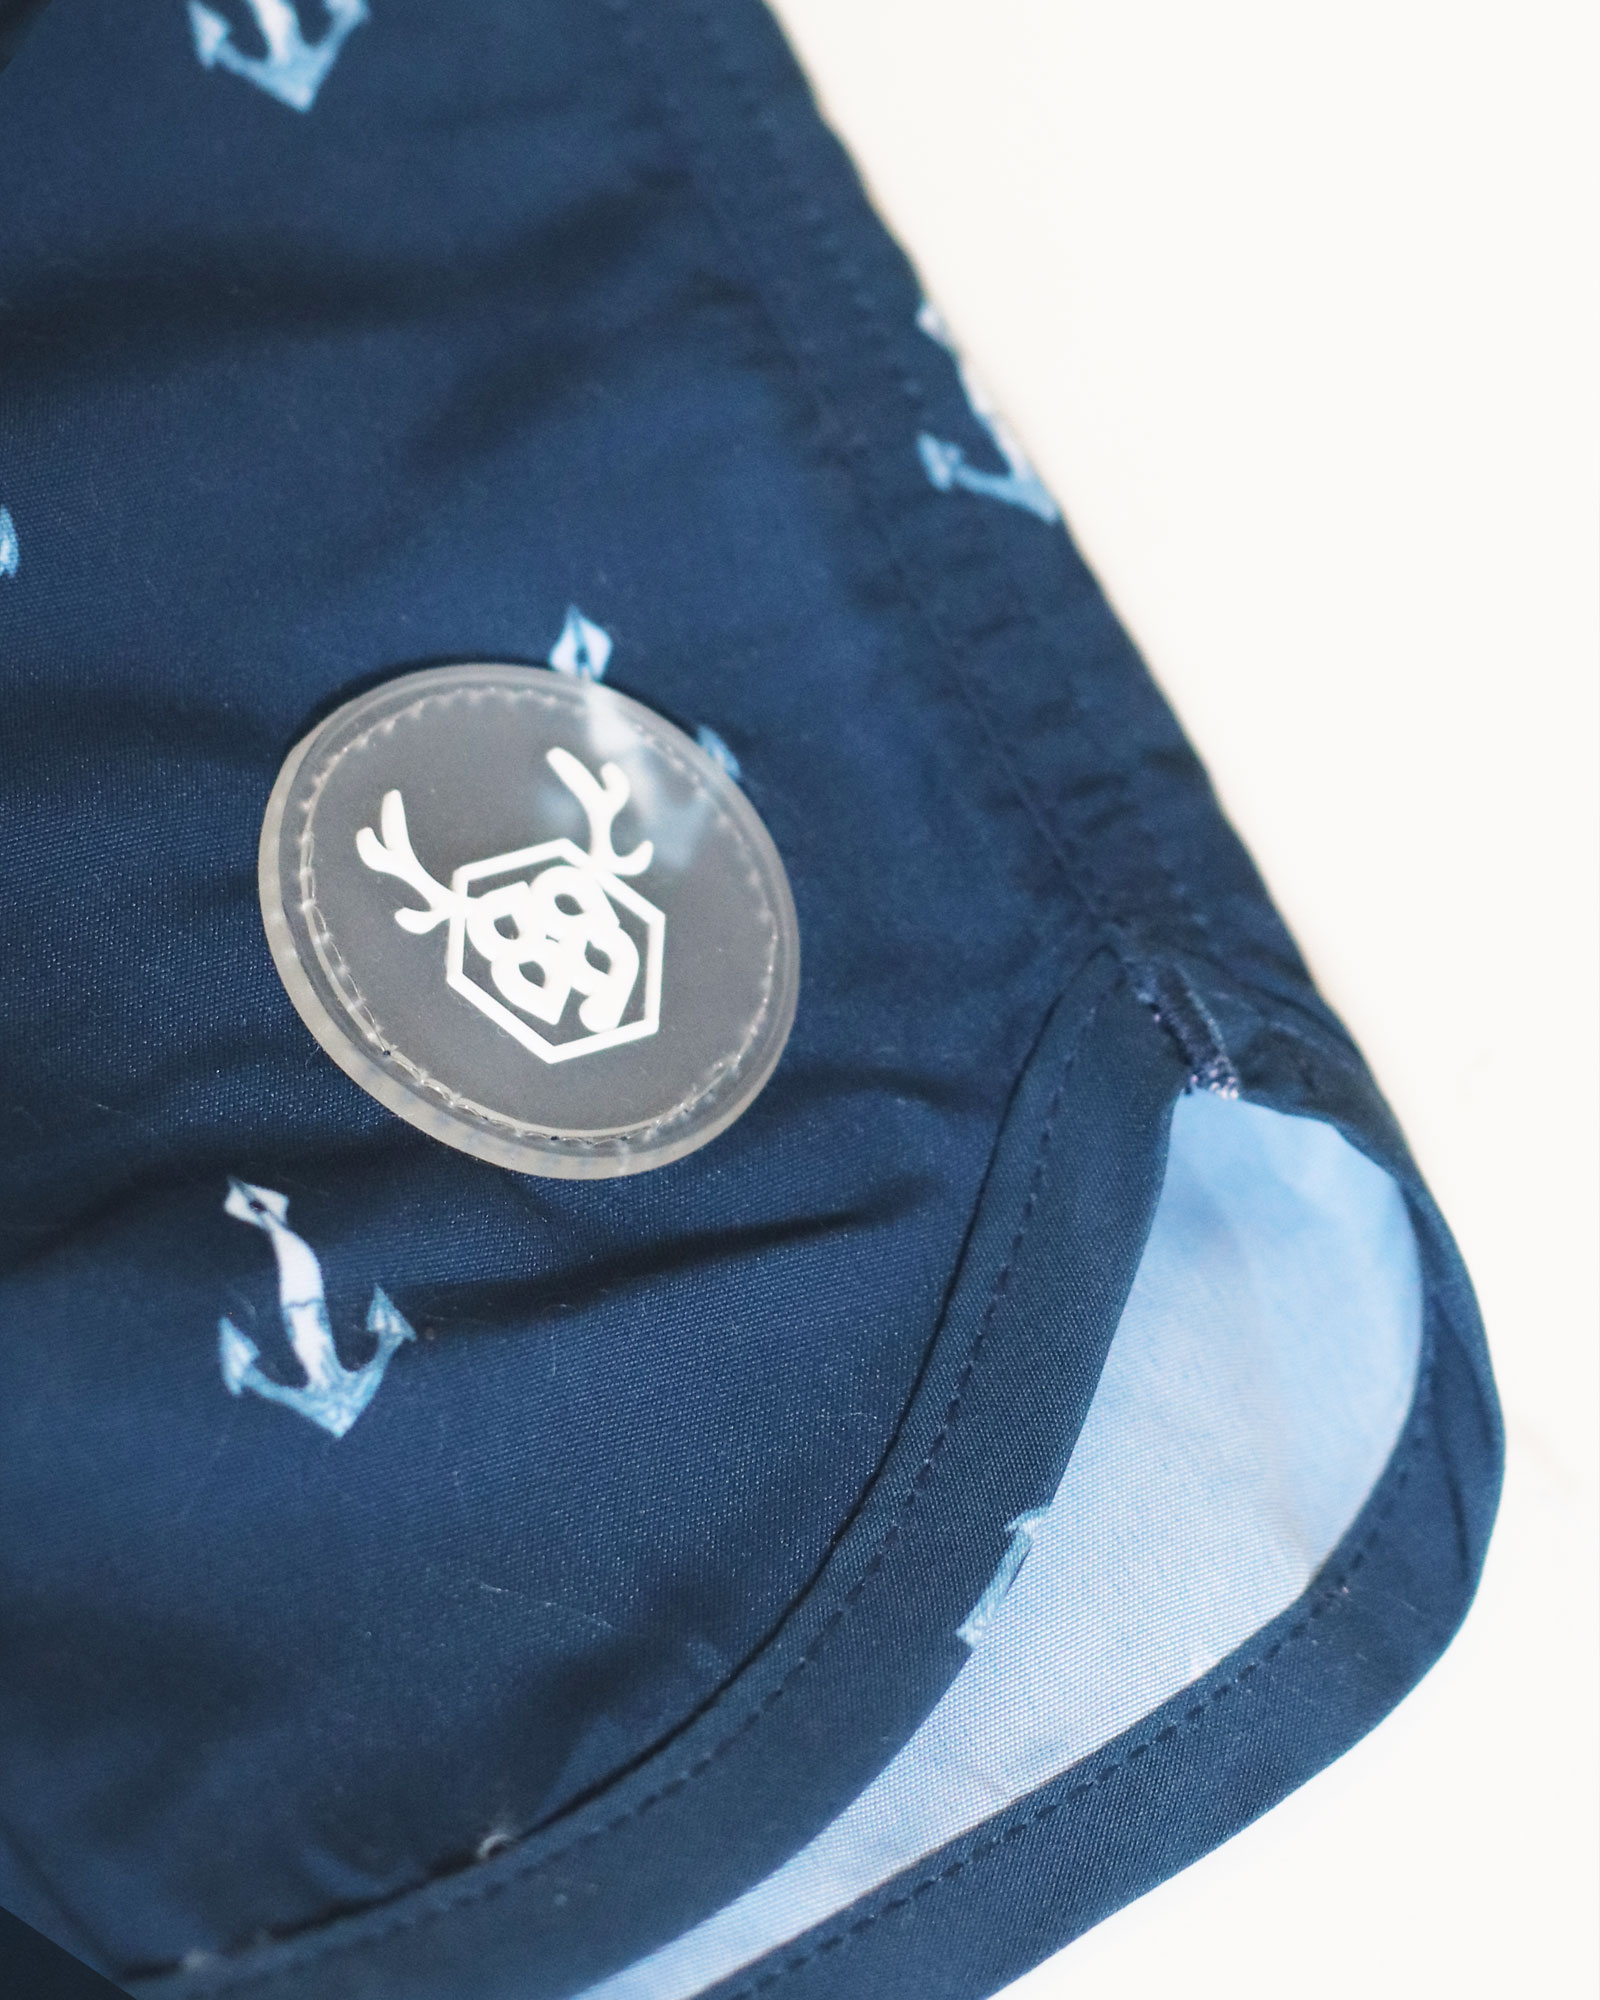 OOVY Kids Eco Anchor Squid Boardshorts